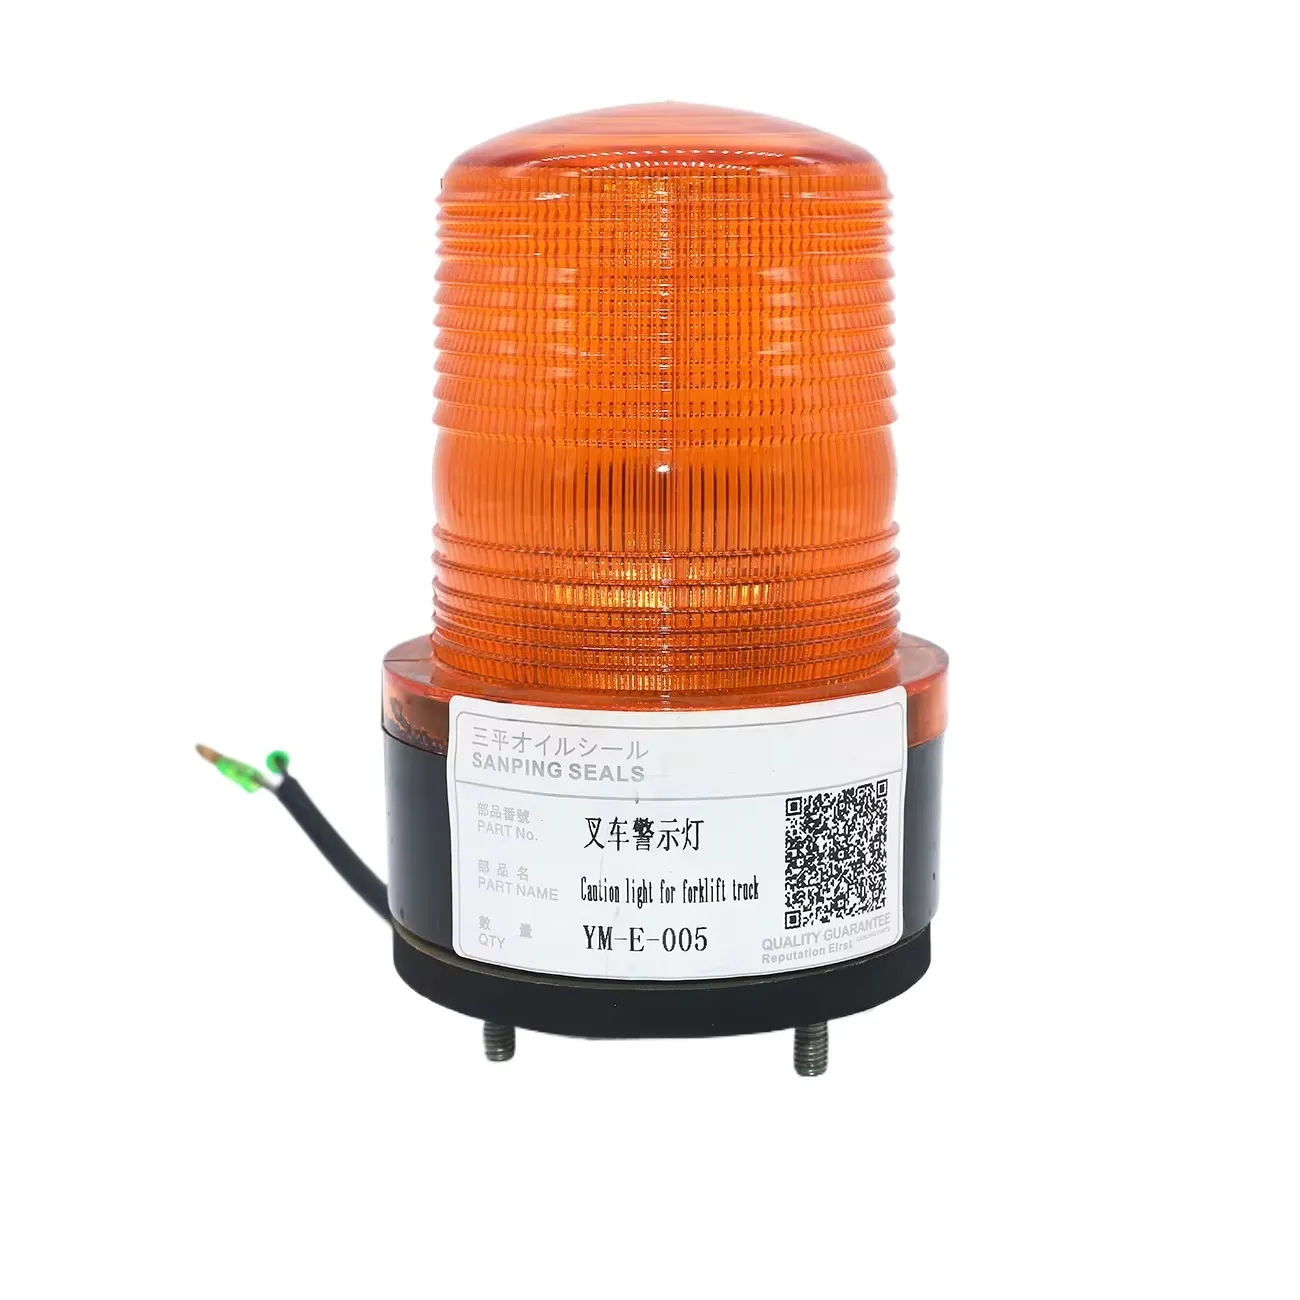 

YM-E-005 Excavator spare parts excavator tail light forForklift warning lights tail left and right led lights